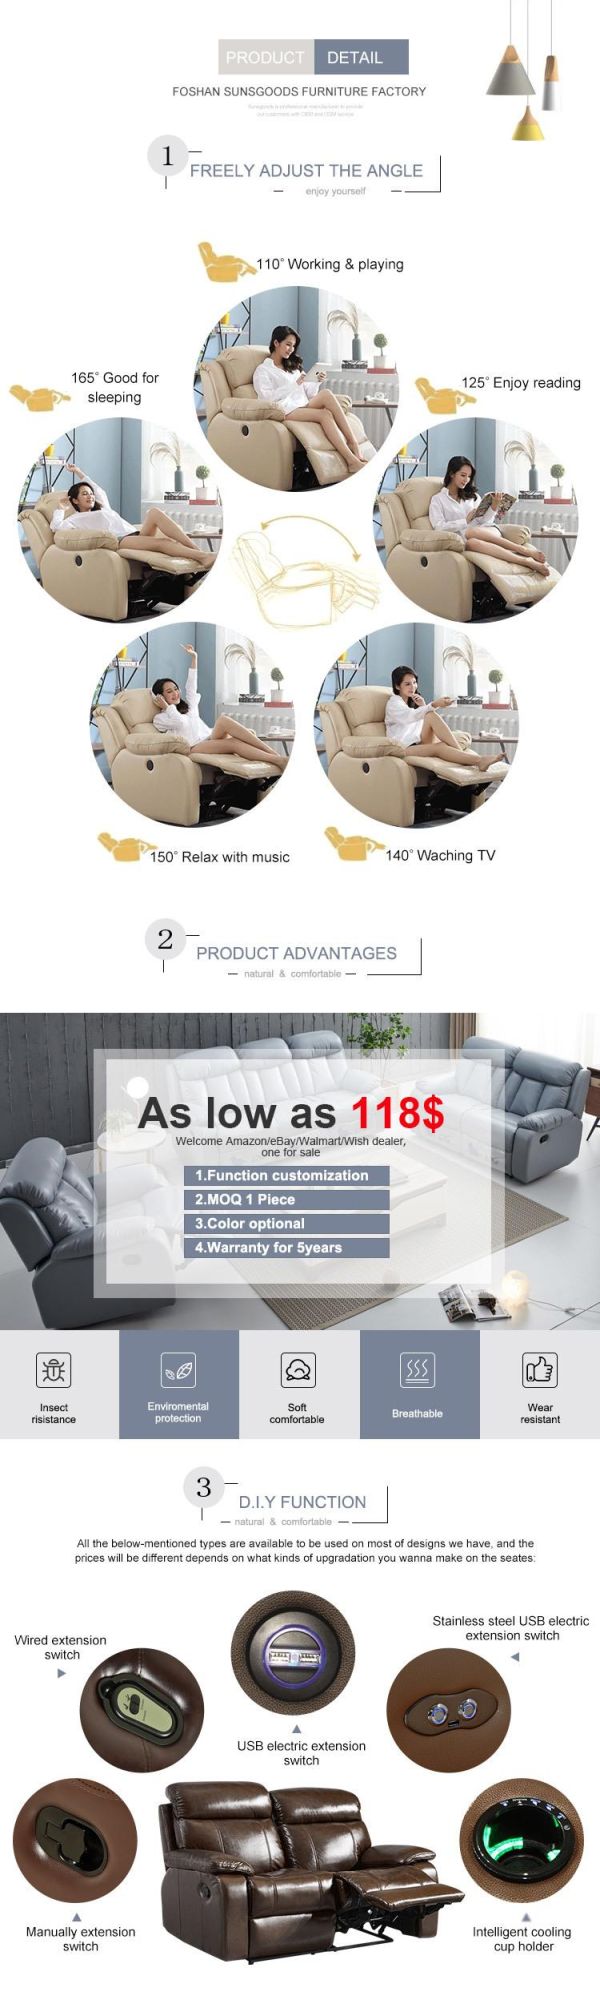 Best Selling Home Theater Chair with Storage and Cup Holder and Ottoman